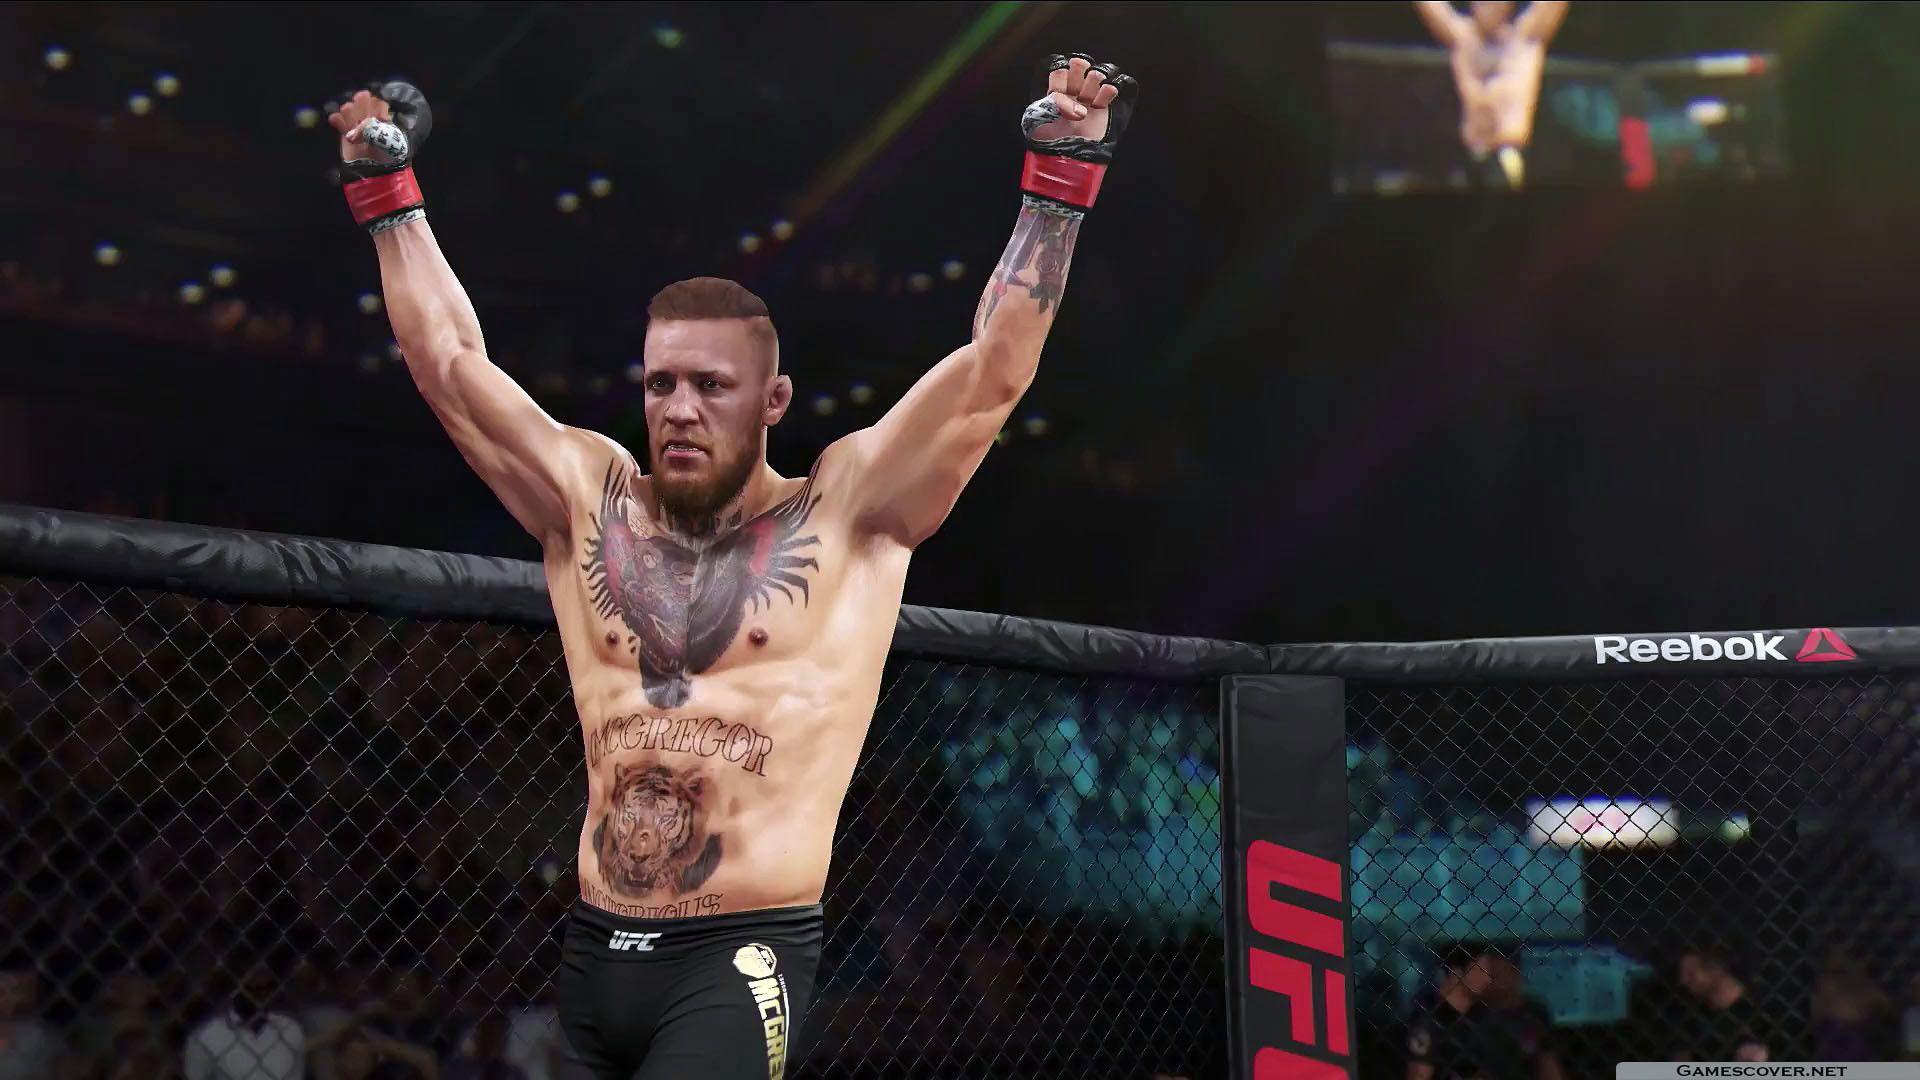 ufc 3 free download for pc